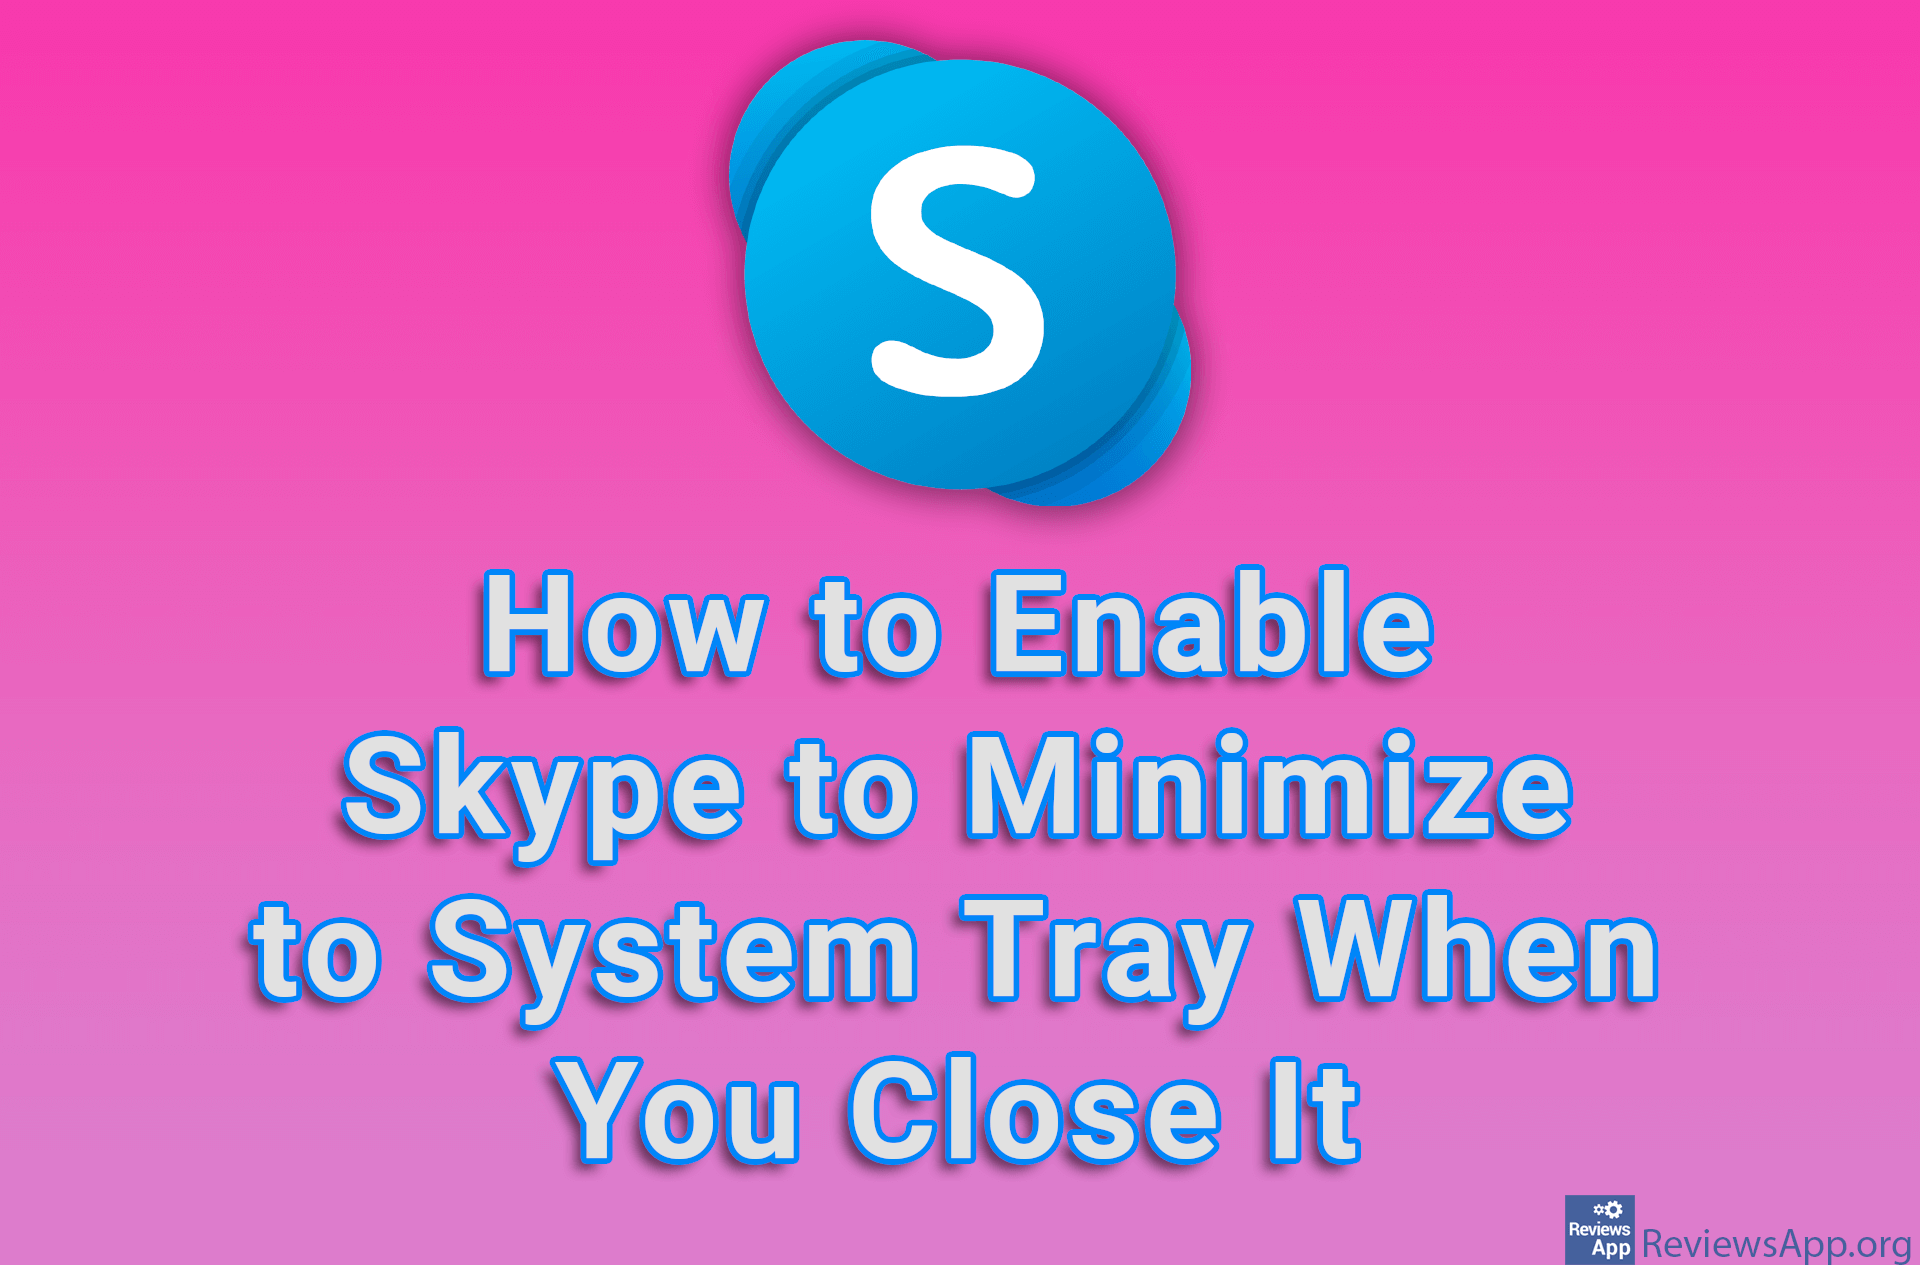 How to Enable Skype to Minimize to System Tray When You Close It